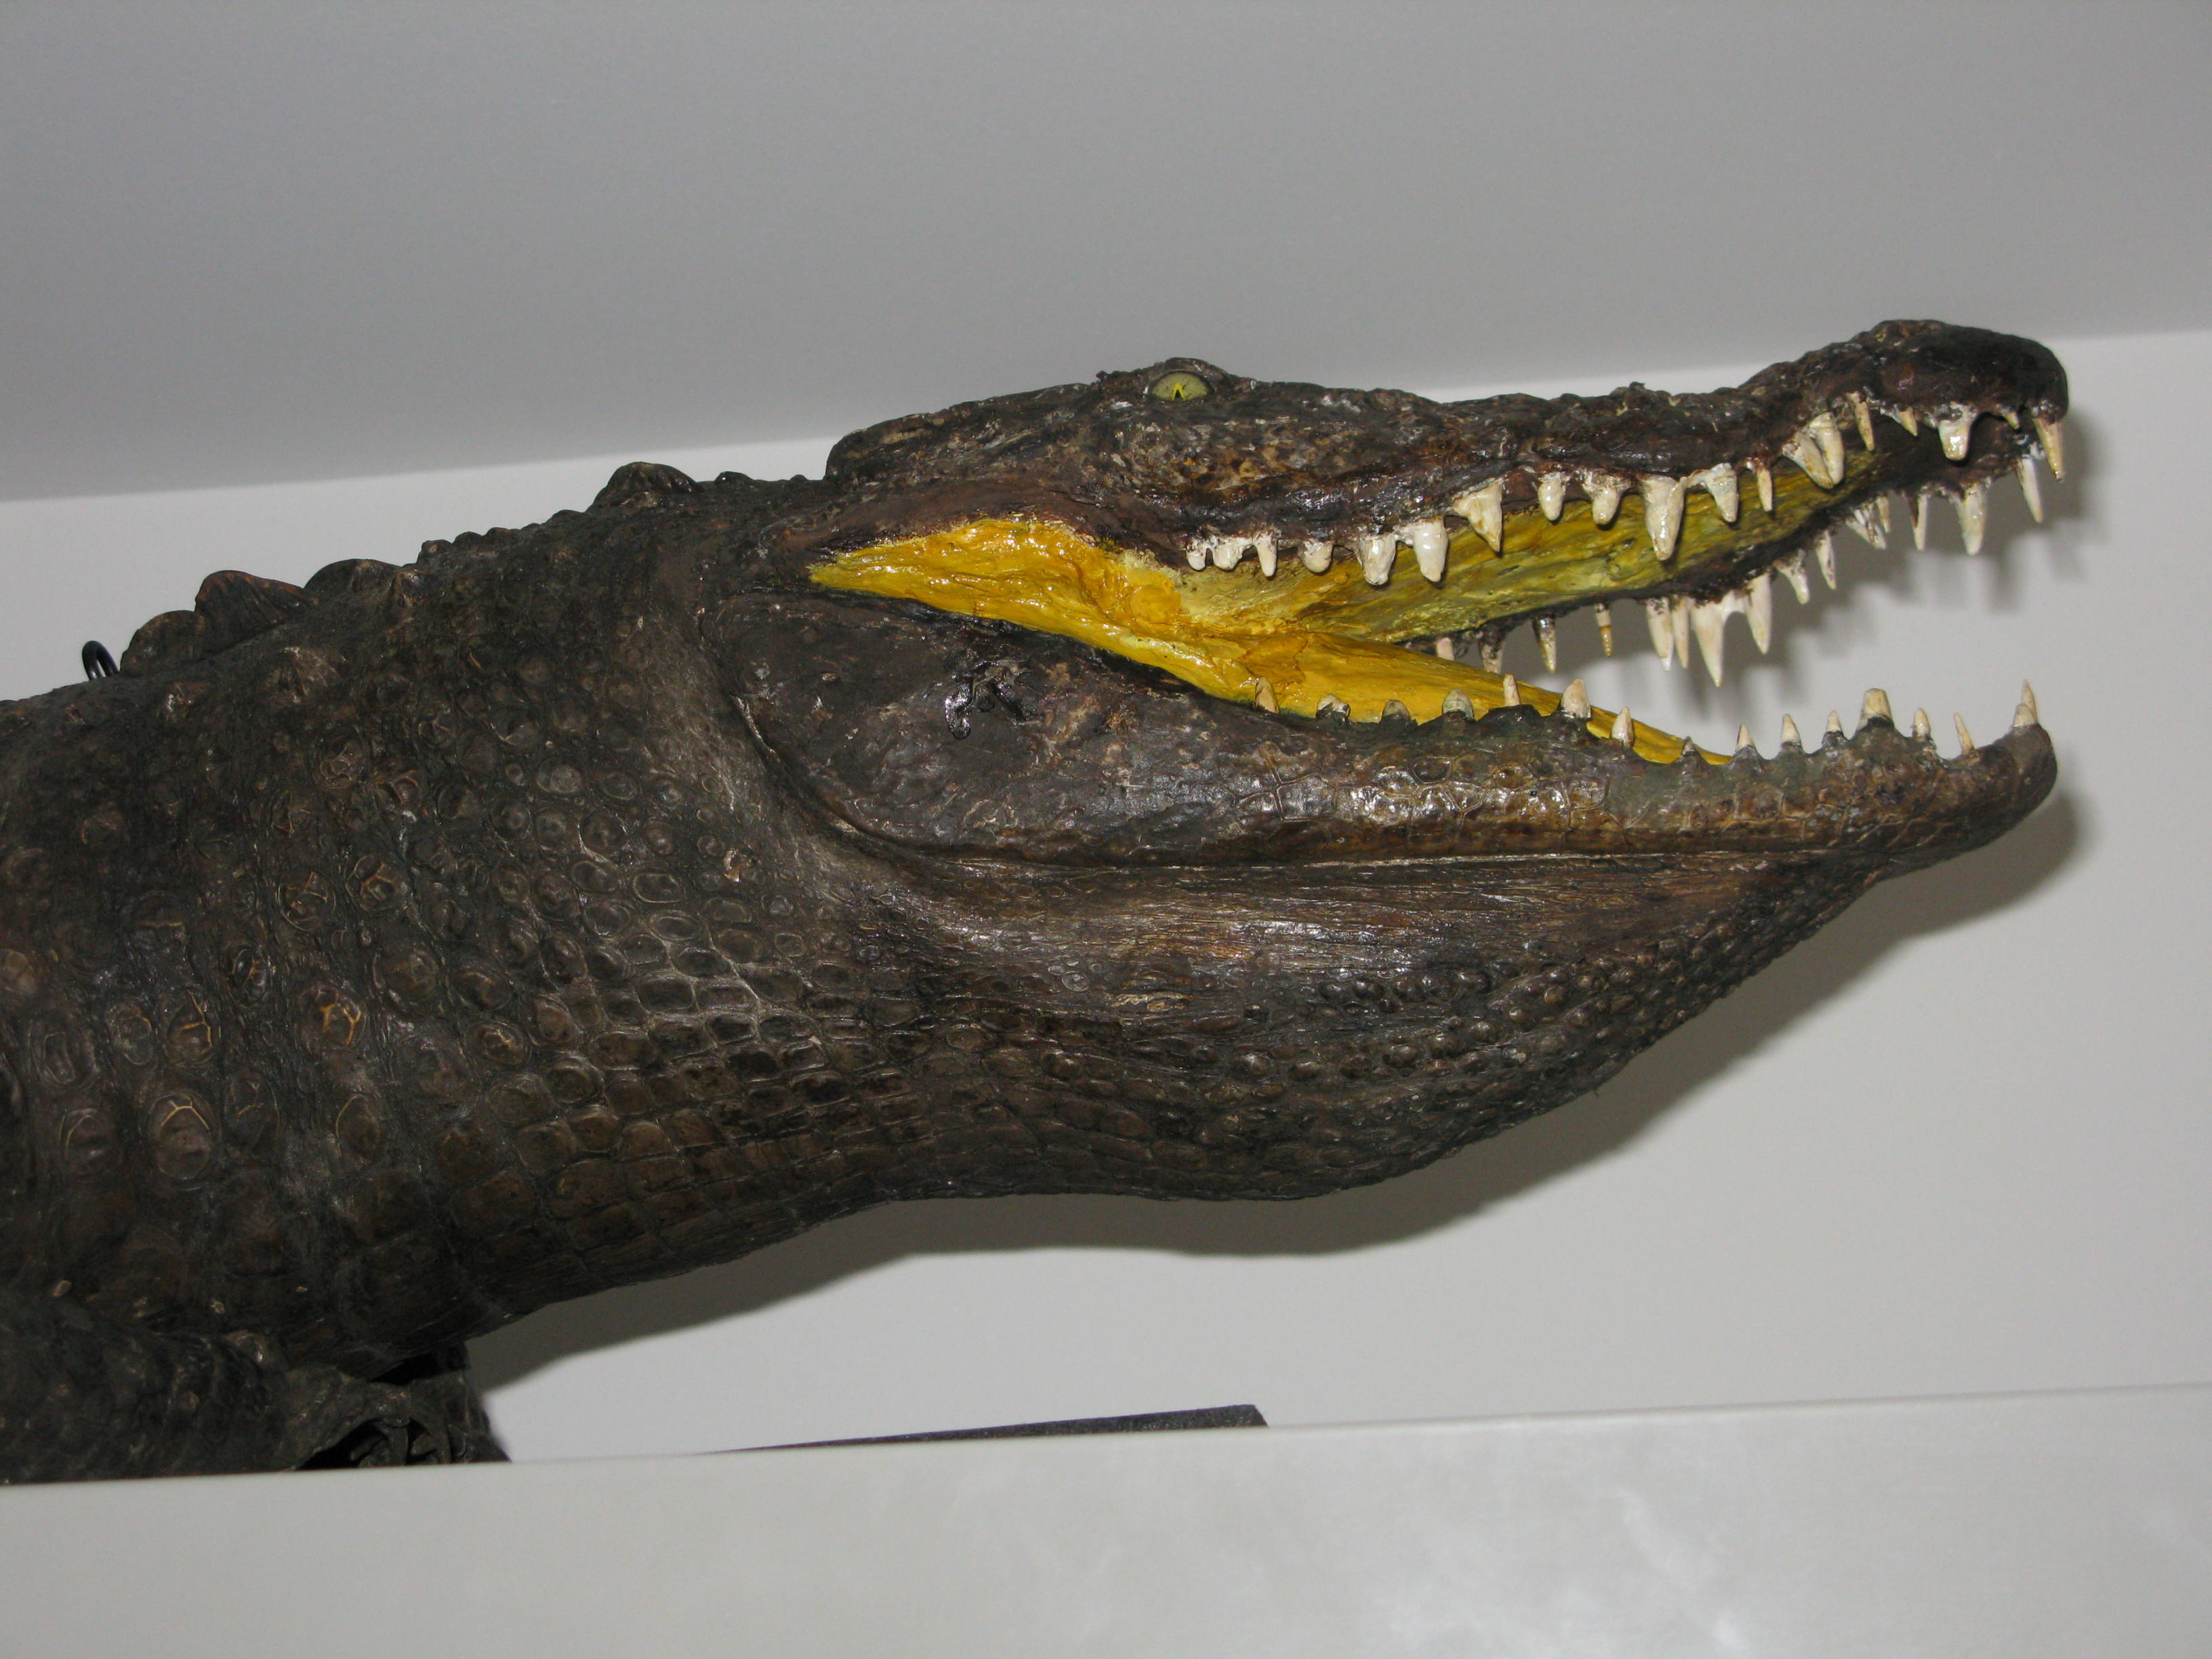 LDRPS: 2015.9.1, 18th or 19th century. This taxidermy Nile Crocodile would have been on display in an apothecary shop. Crocodiles or alligators were a symbol of pharmacy, although it is not clear why. Some say it is because they look like dragons, others because they were exotic, like the medicines kept by the apothecary